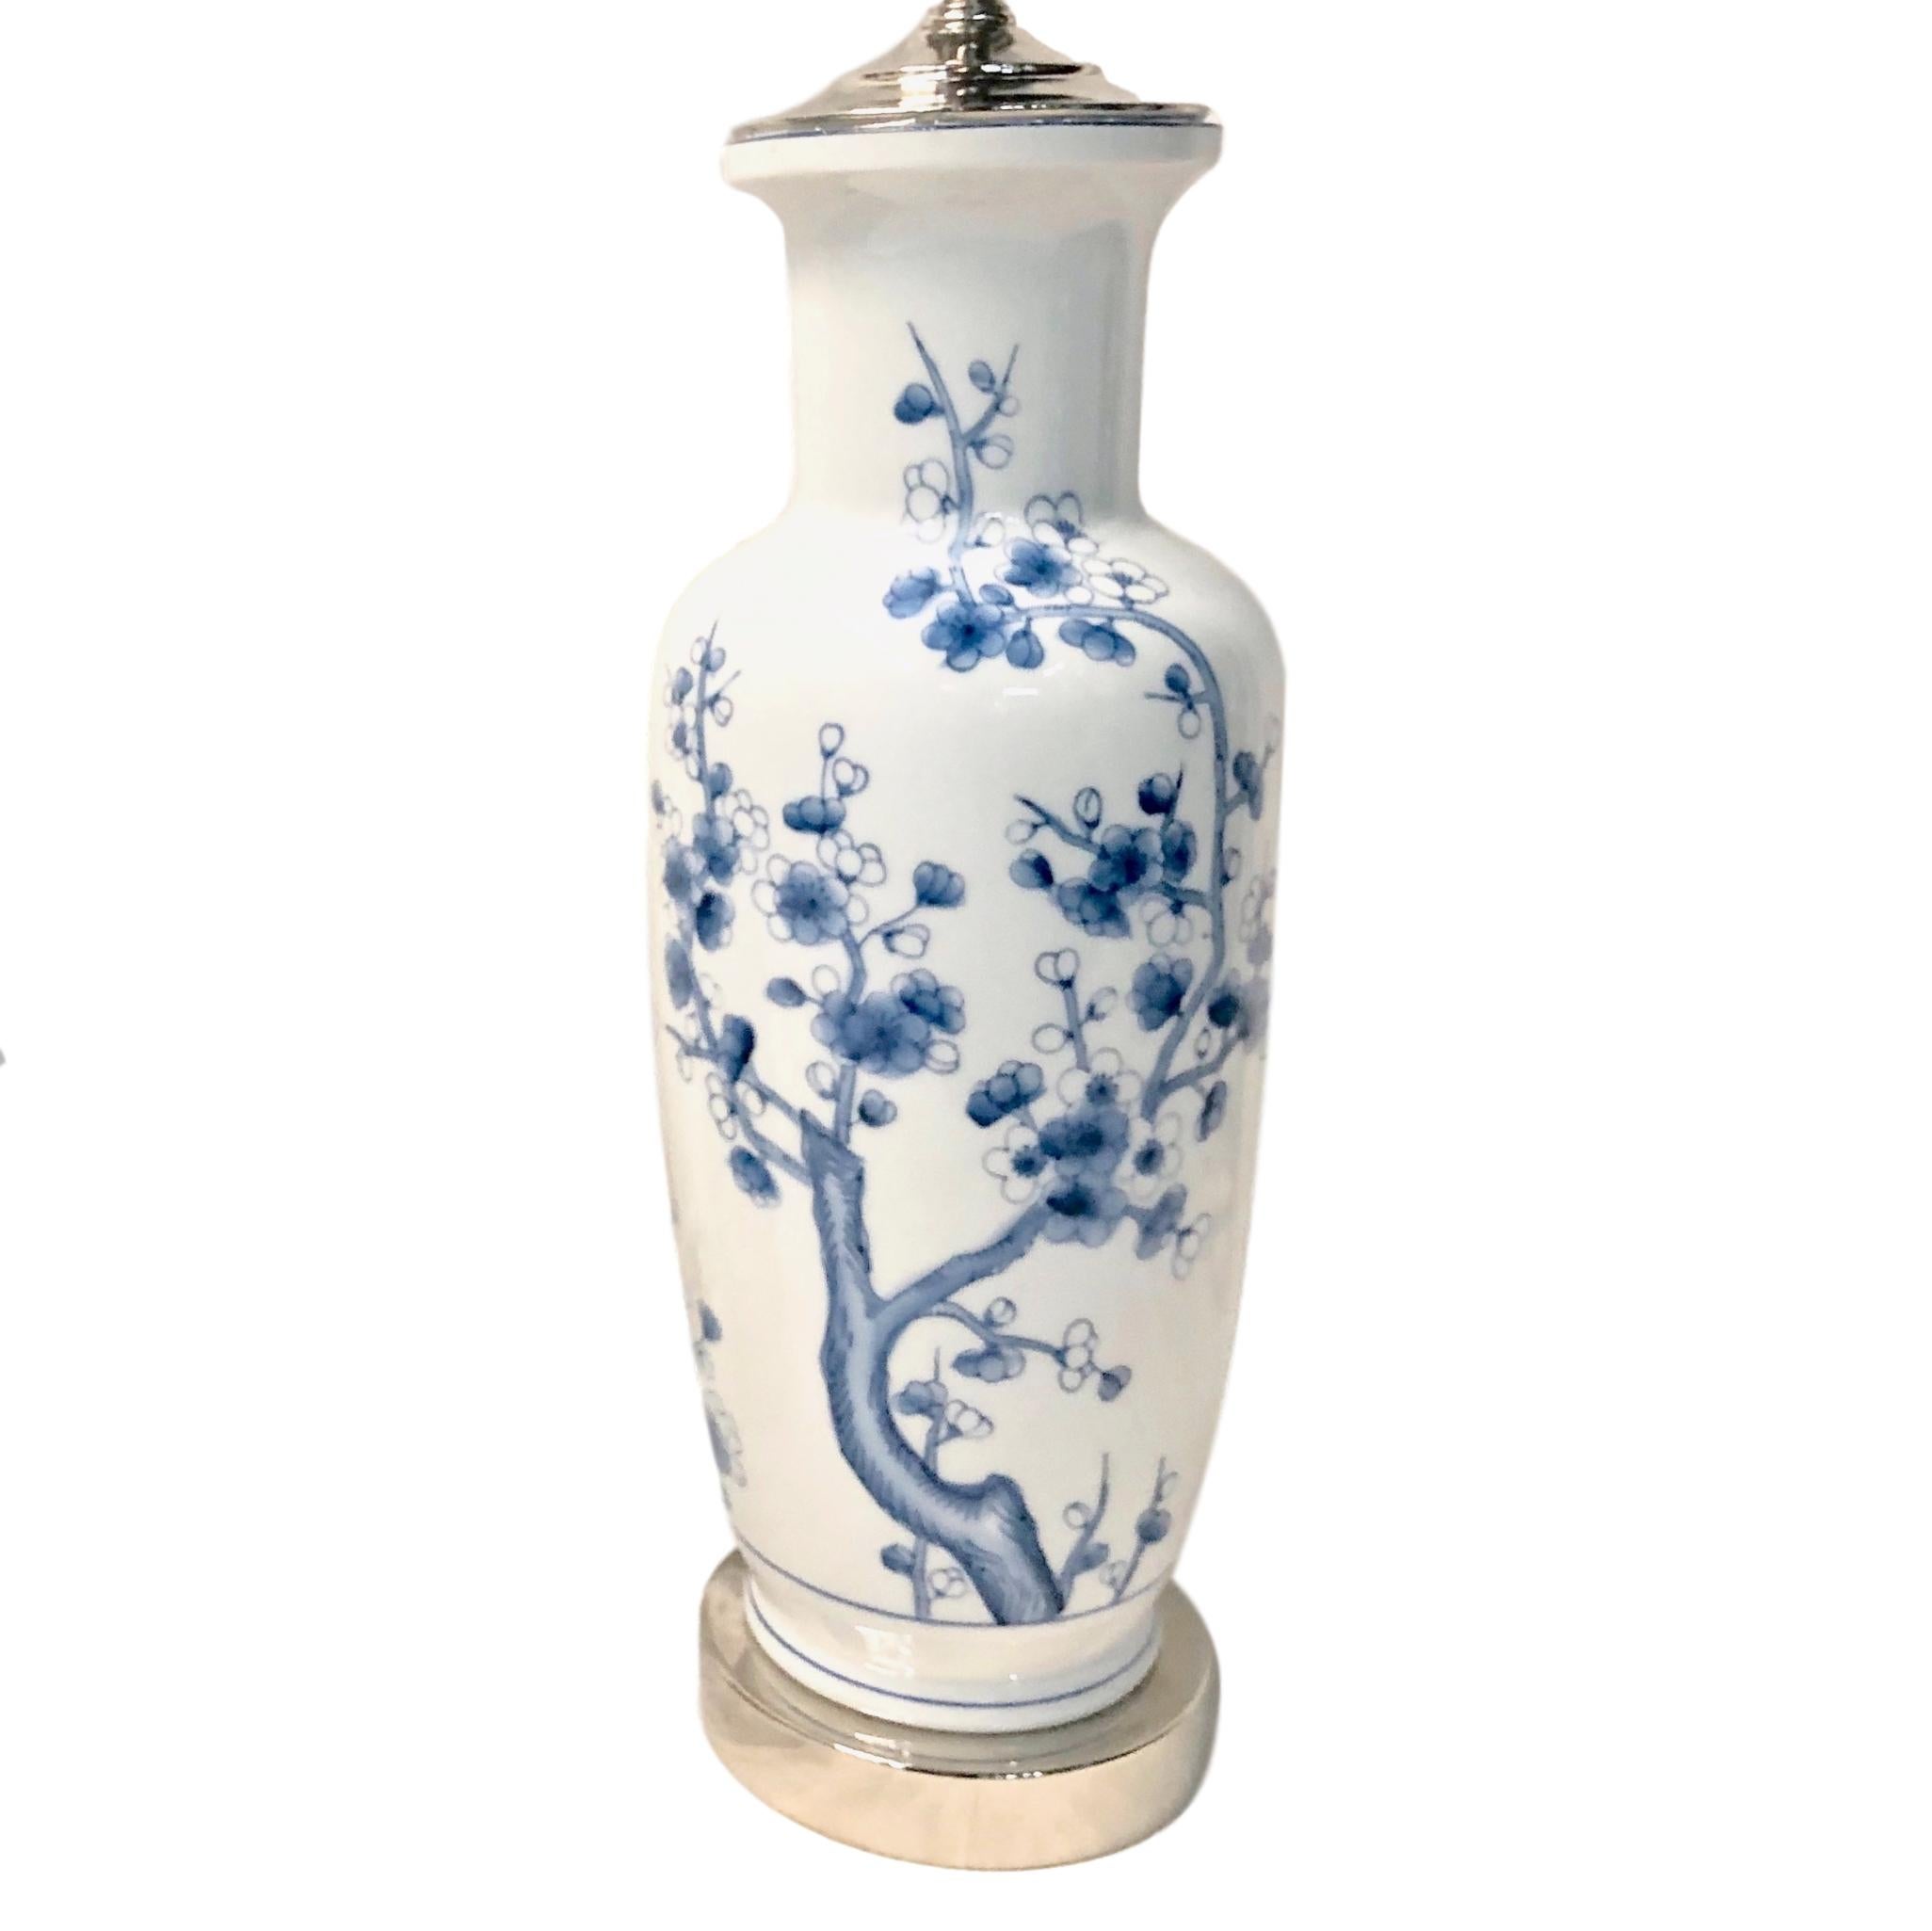 A pair of circa 1930's French white glazed porcelain with painted blue floral motif.

Measurements:
Height of body: 17